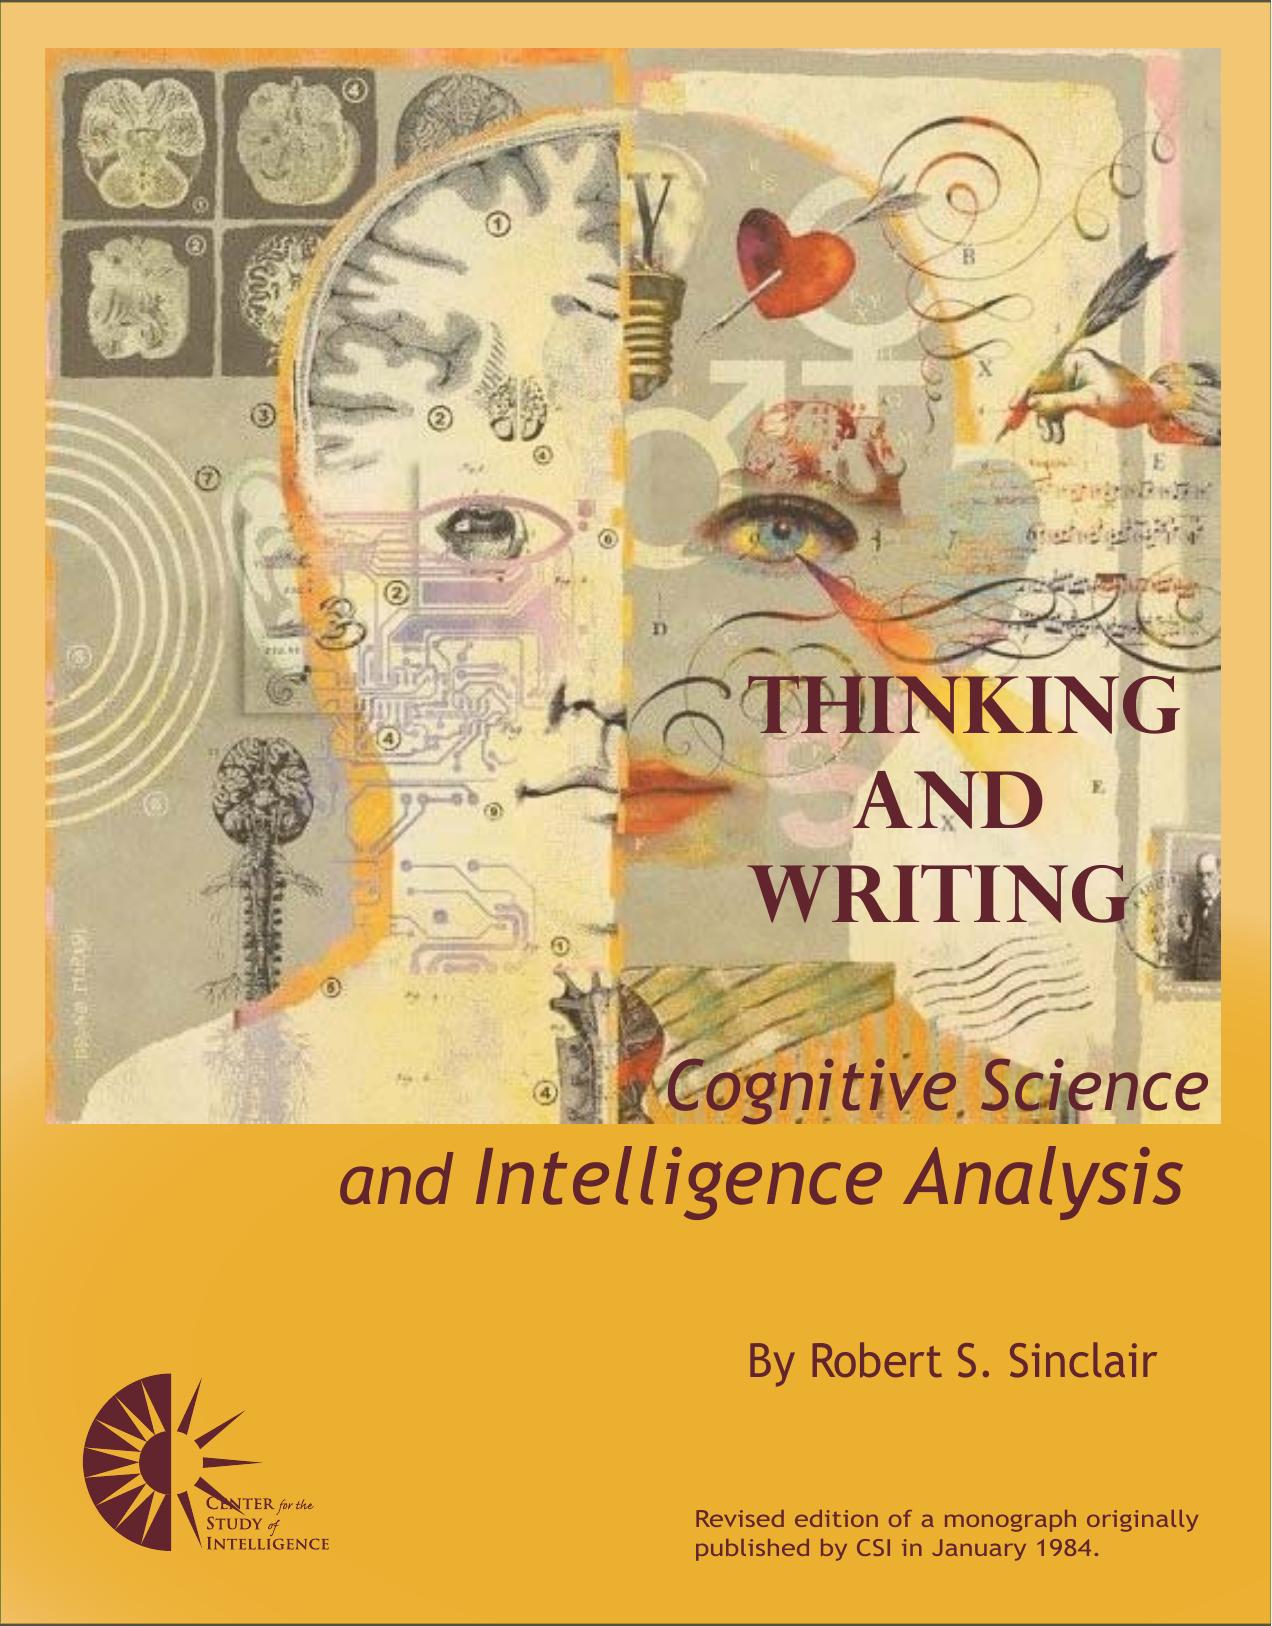 Thinking and Writing: Cognitive Science and Intelligence Analysis